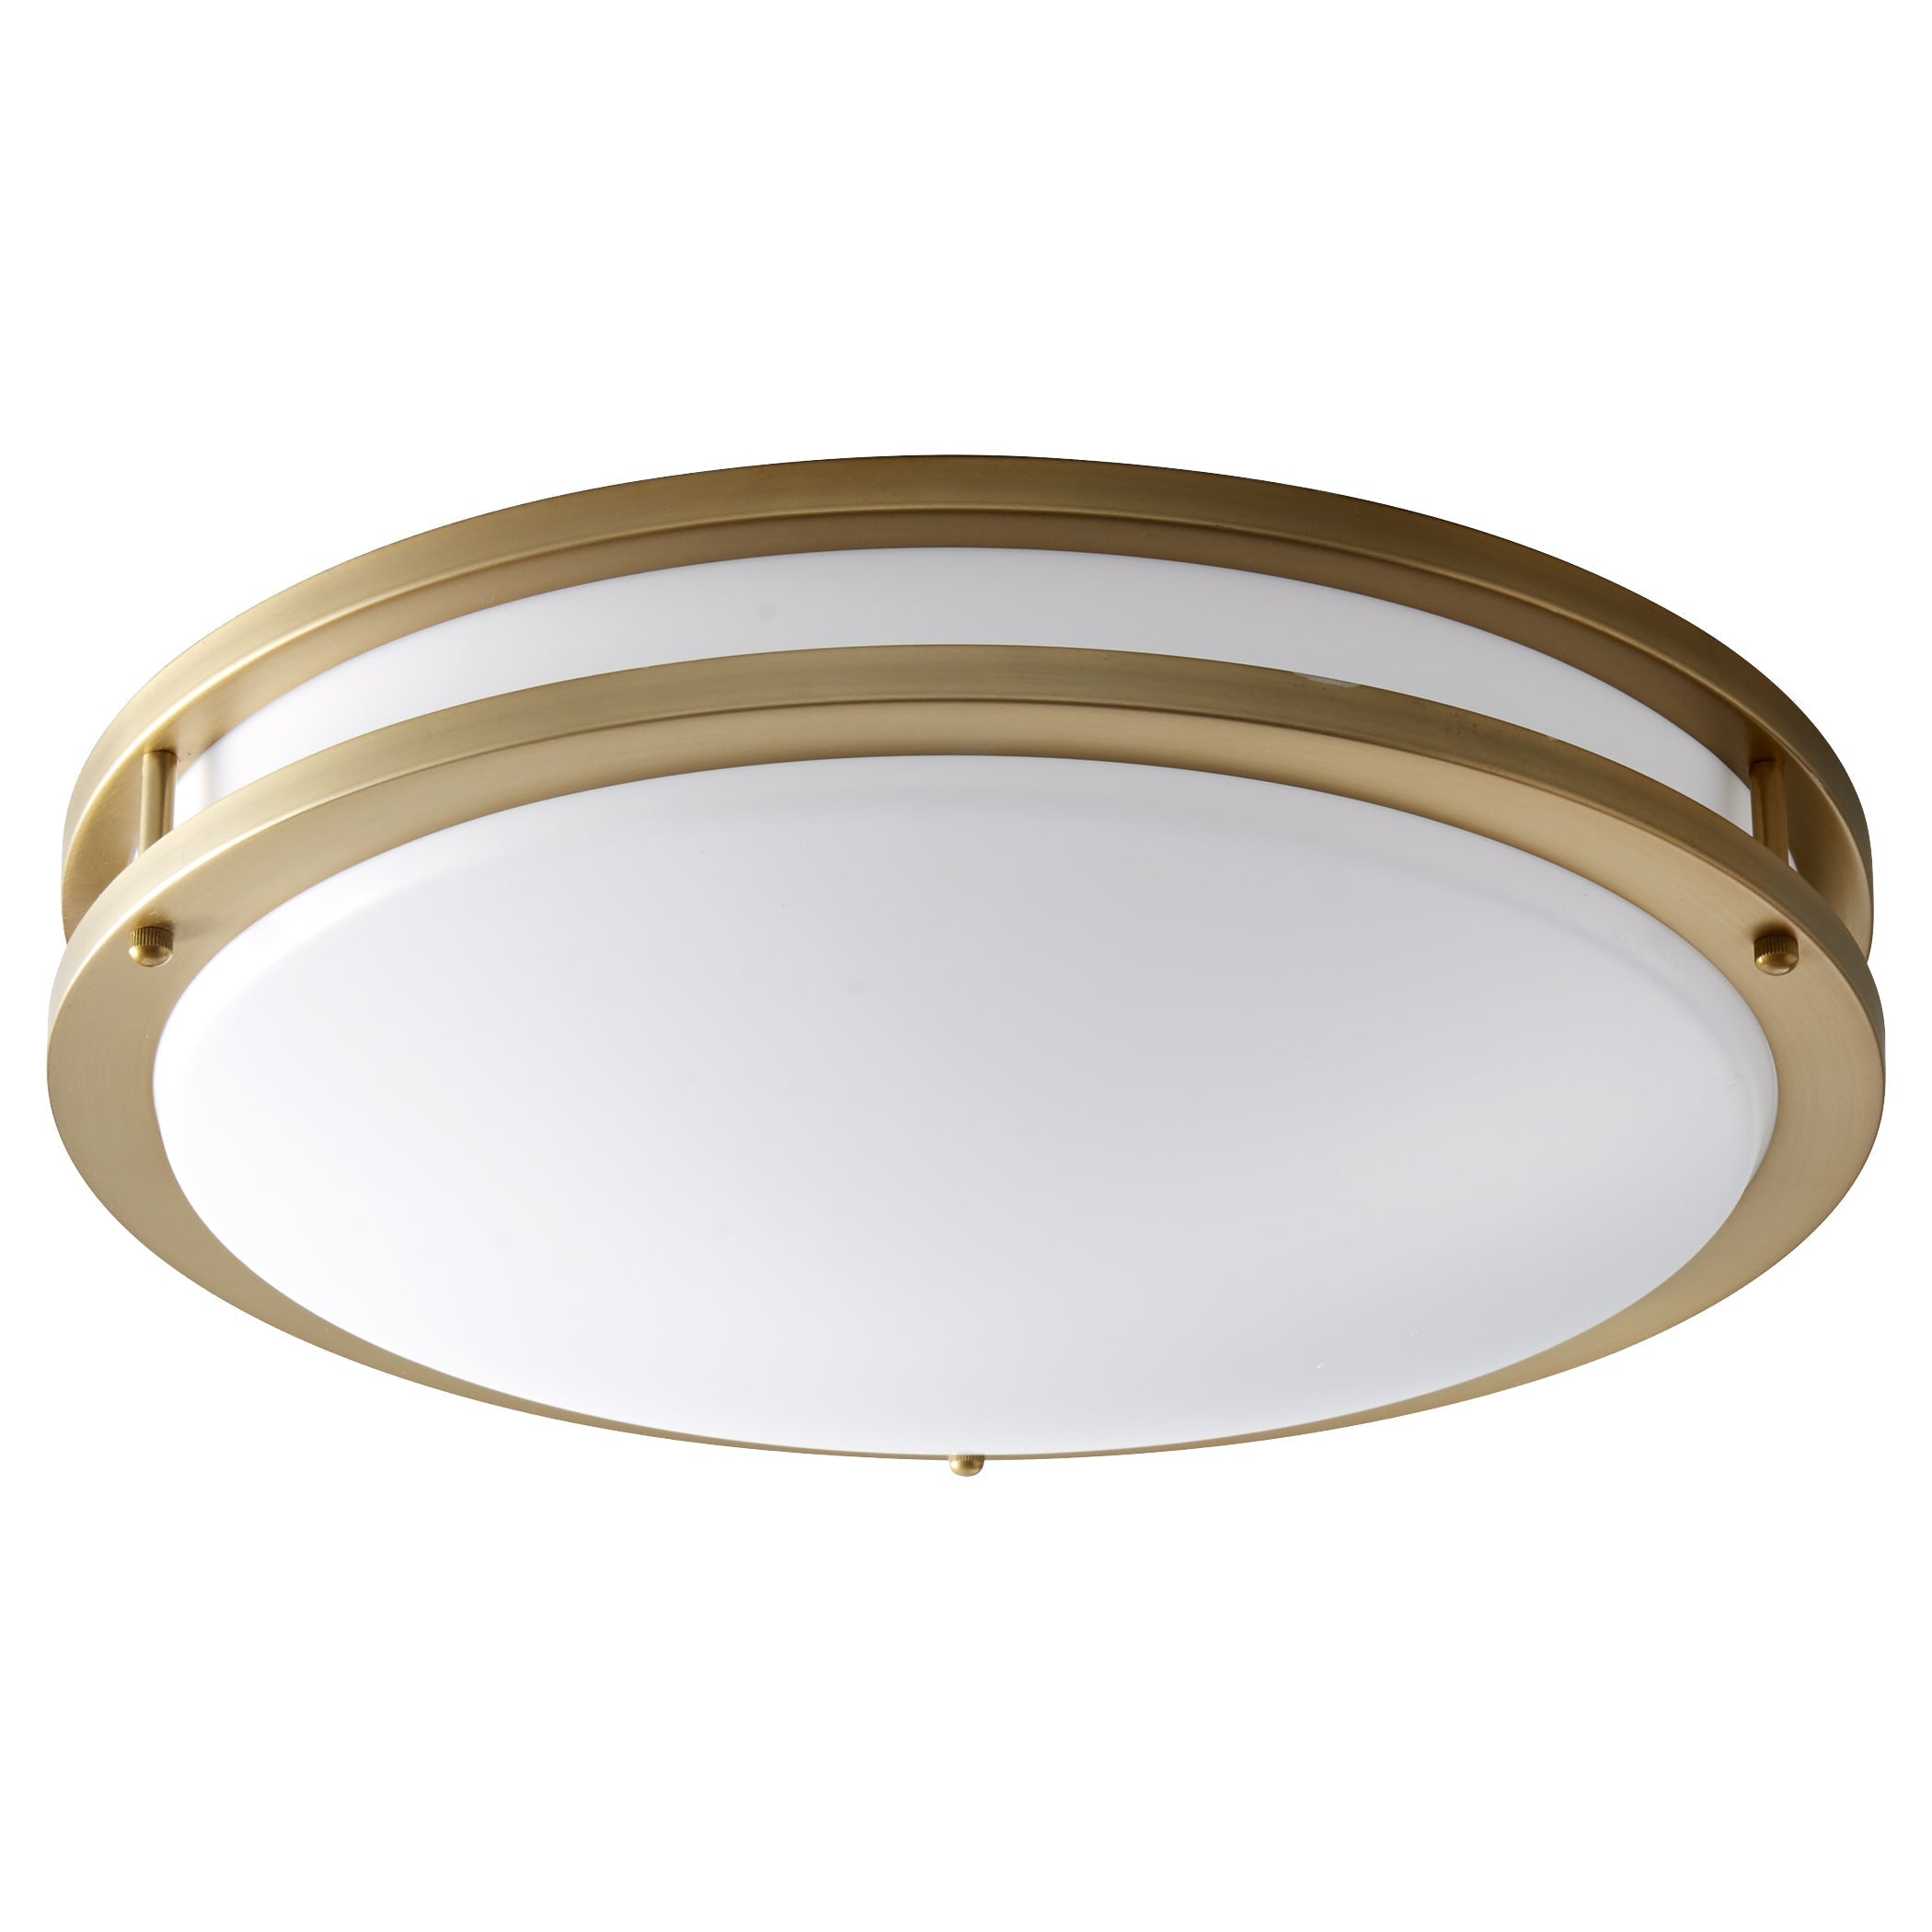 Oxygen Oracle 3-620-40 Modern Ceiling Mount - Aged Brass